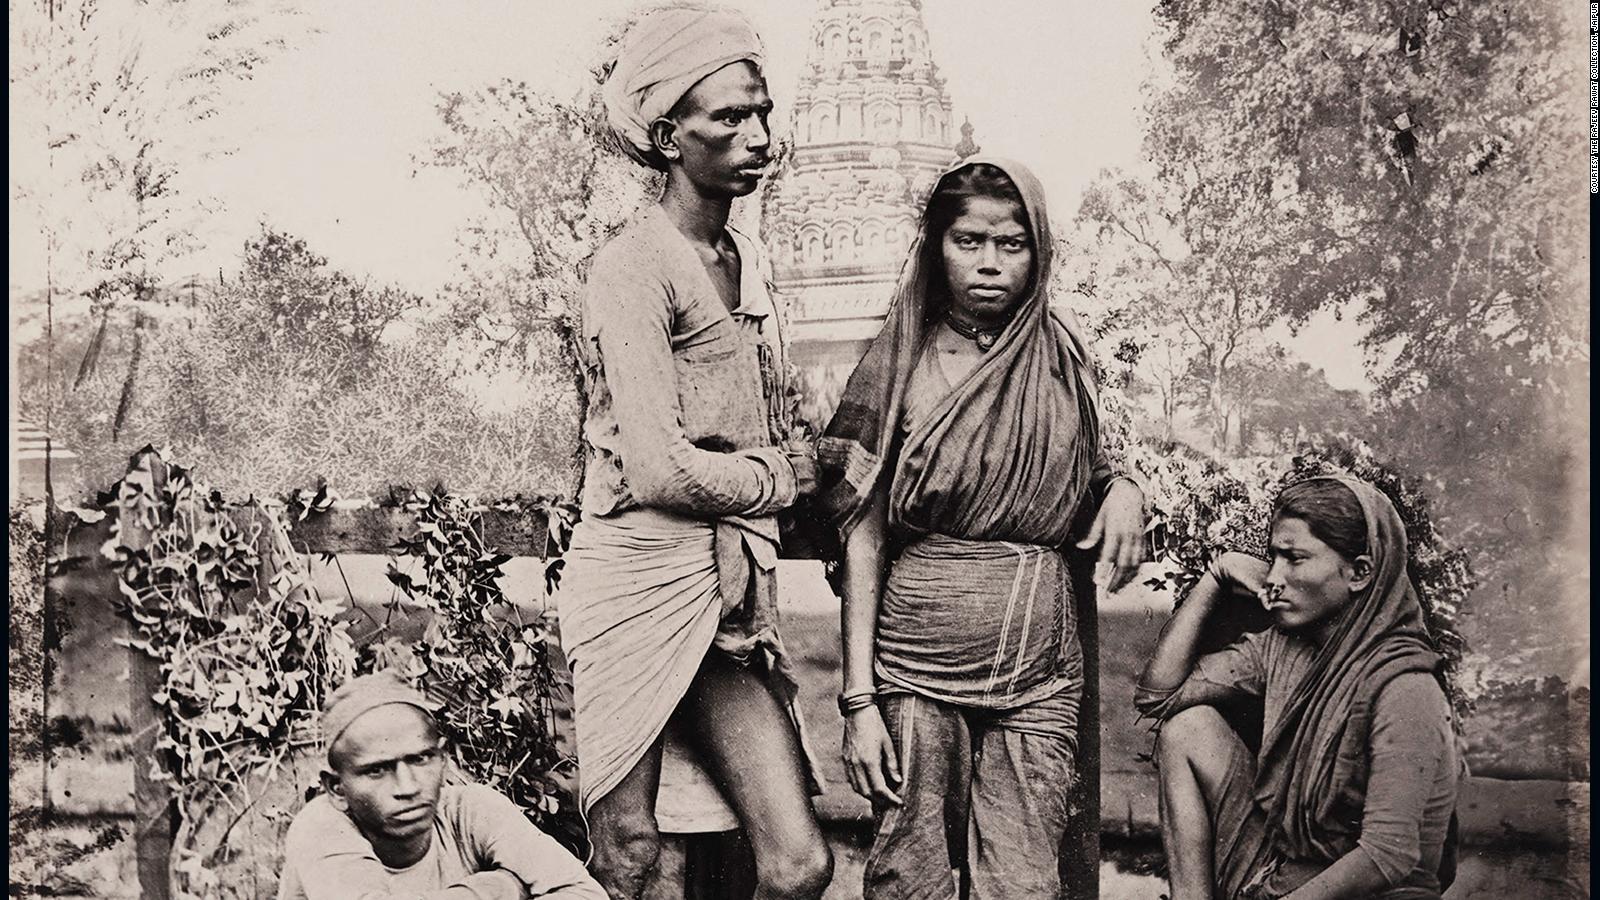 India photography: What these rare image tell us about colonial rule